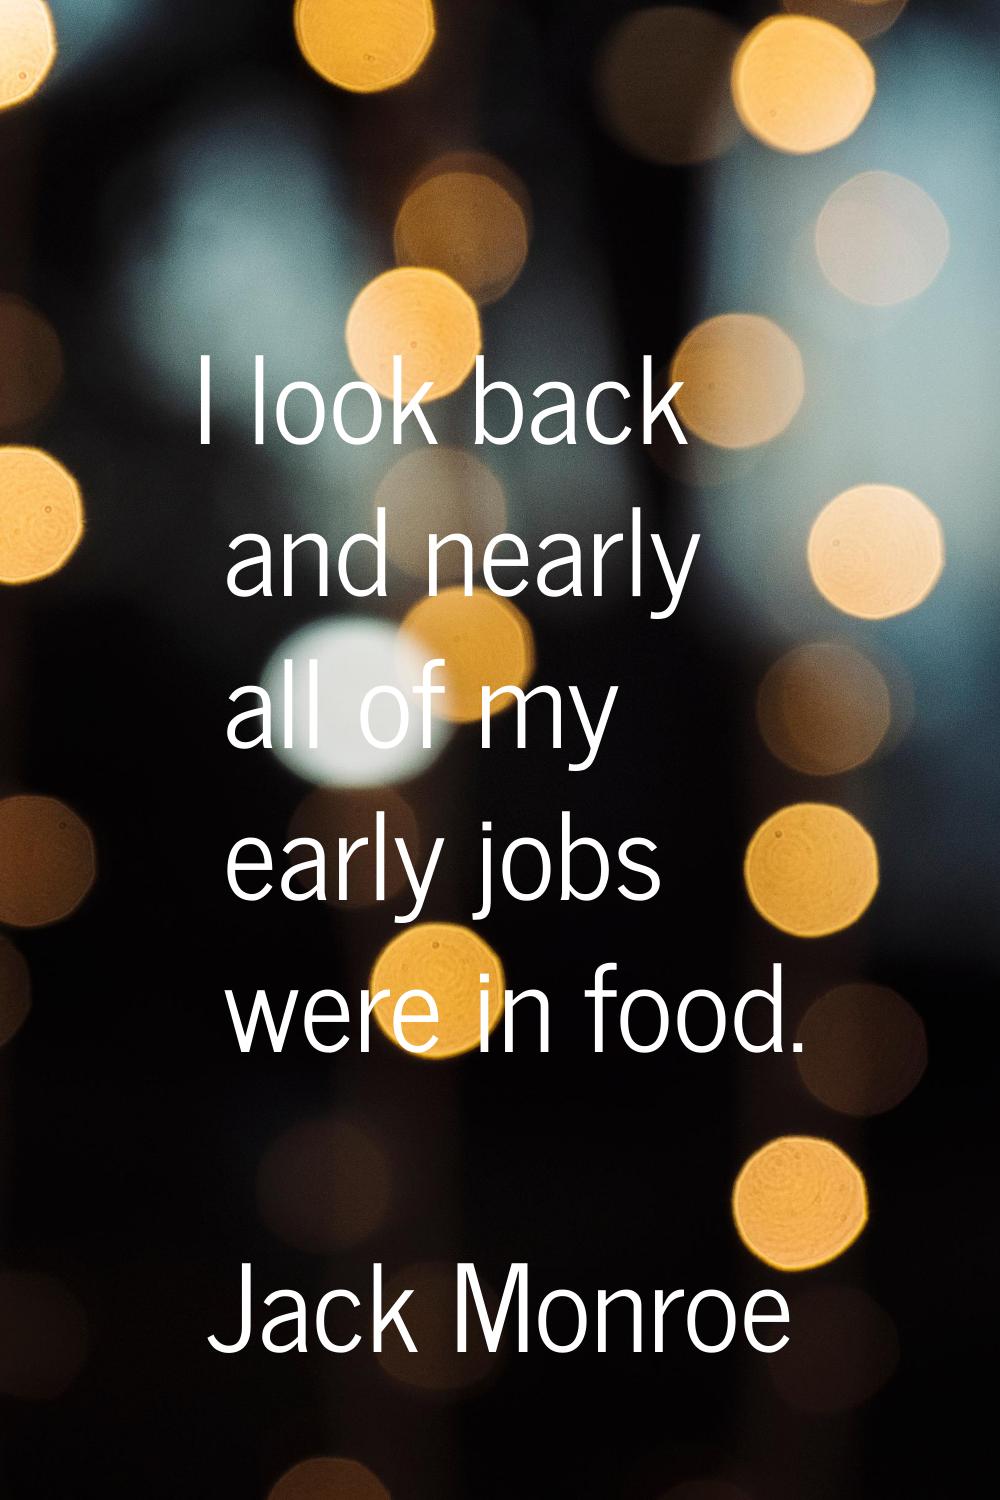 I look back and nearly all of my early jobs were in food.